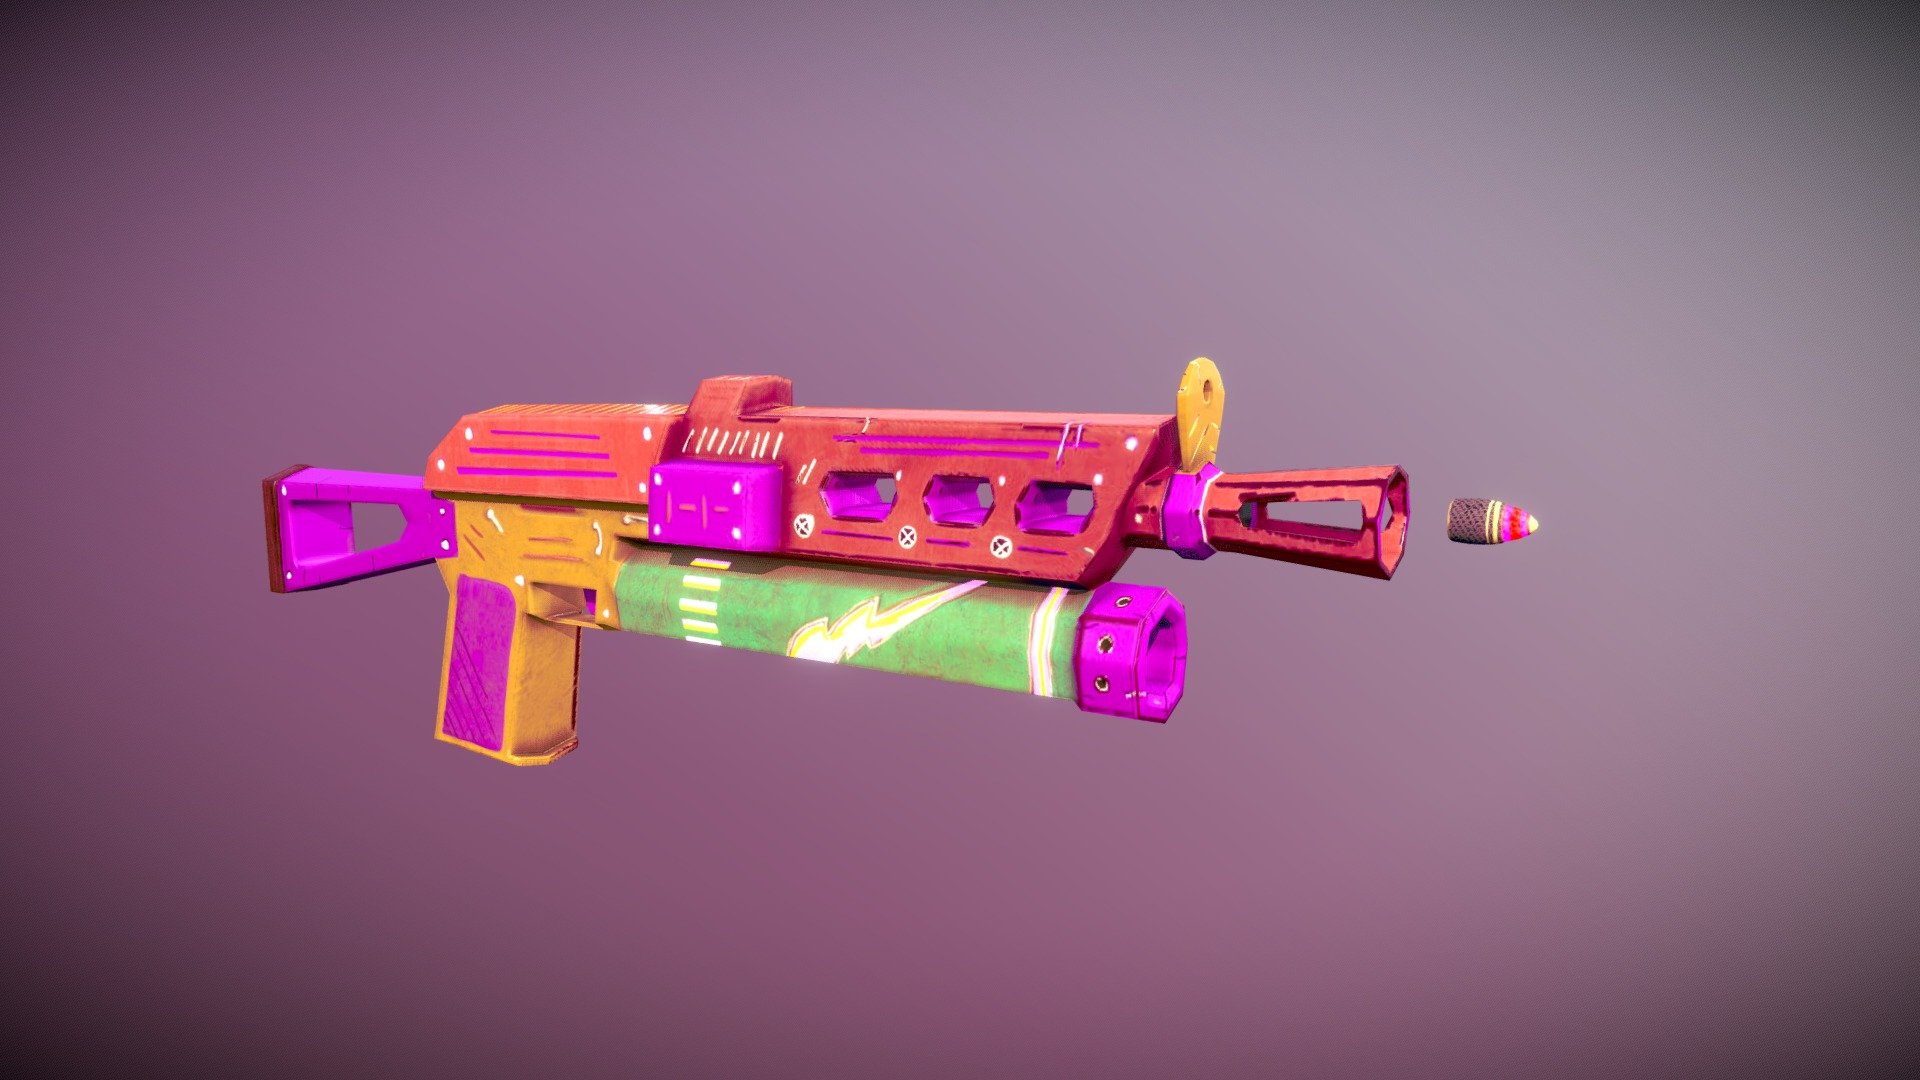 Ready for game weapon and bullet.

Modelated in 3dsmax, Hig model desing for bump mup generated sculpting on ZBrush and finally textured on Substance Painter.
Optimiced mesh 3d model